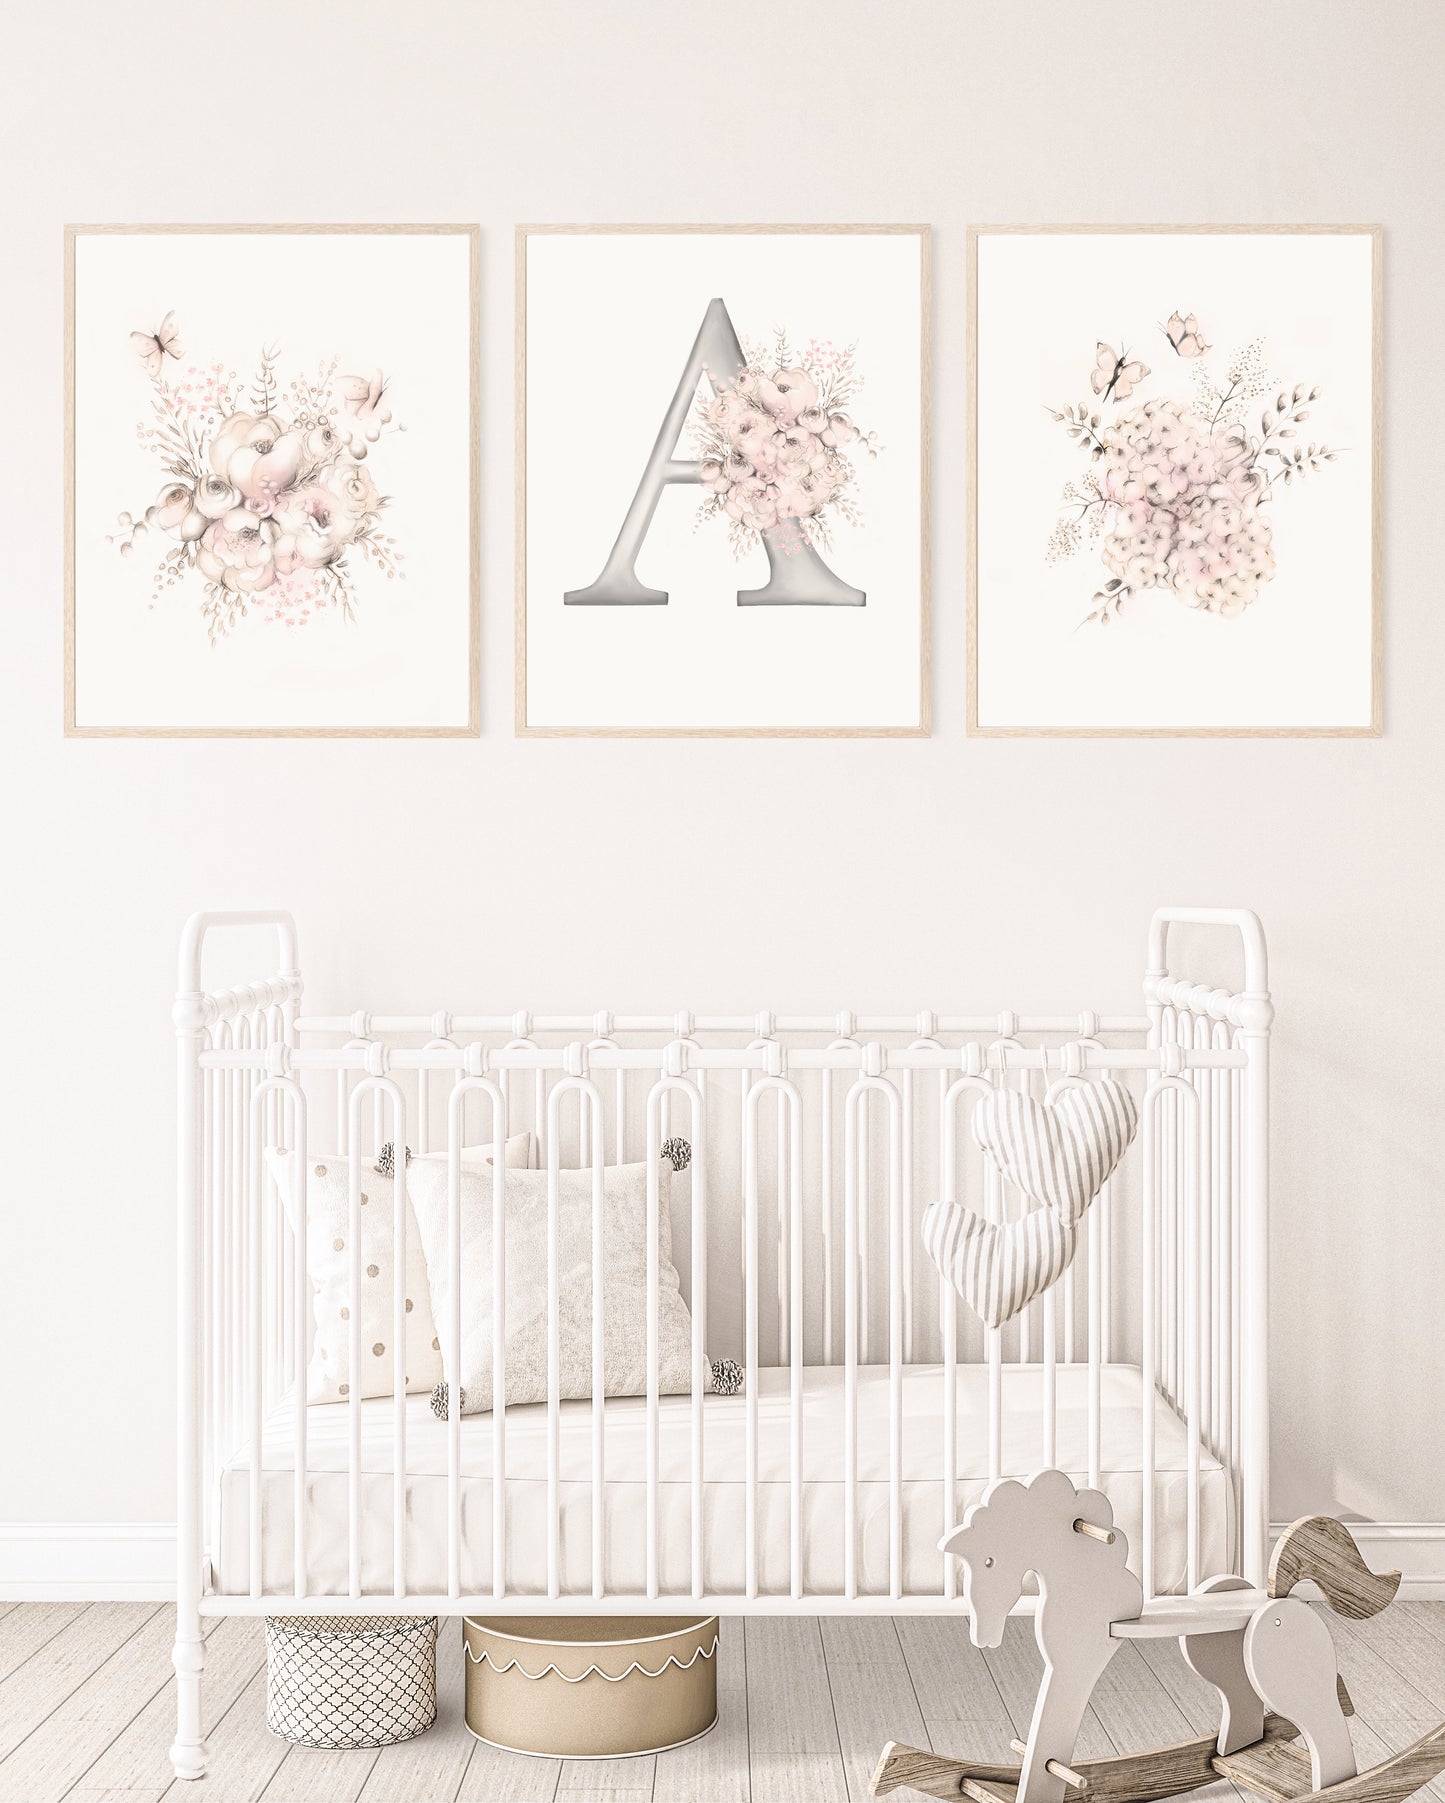 Set of three flower and butterfly sketches in tones of beige and blush pink. Center print has a letter A designed with flowers. Prints are mounted in wood frames and are hung above a white crib in a pink baby girl's nursery - Studio Q - Art by Nicky Quartermaine Scott